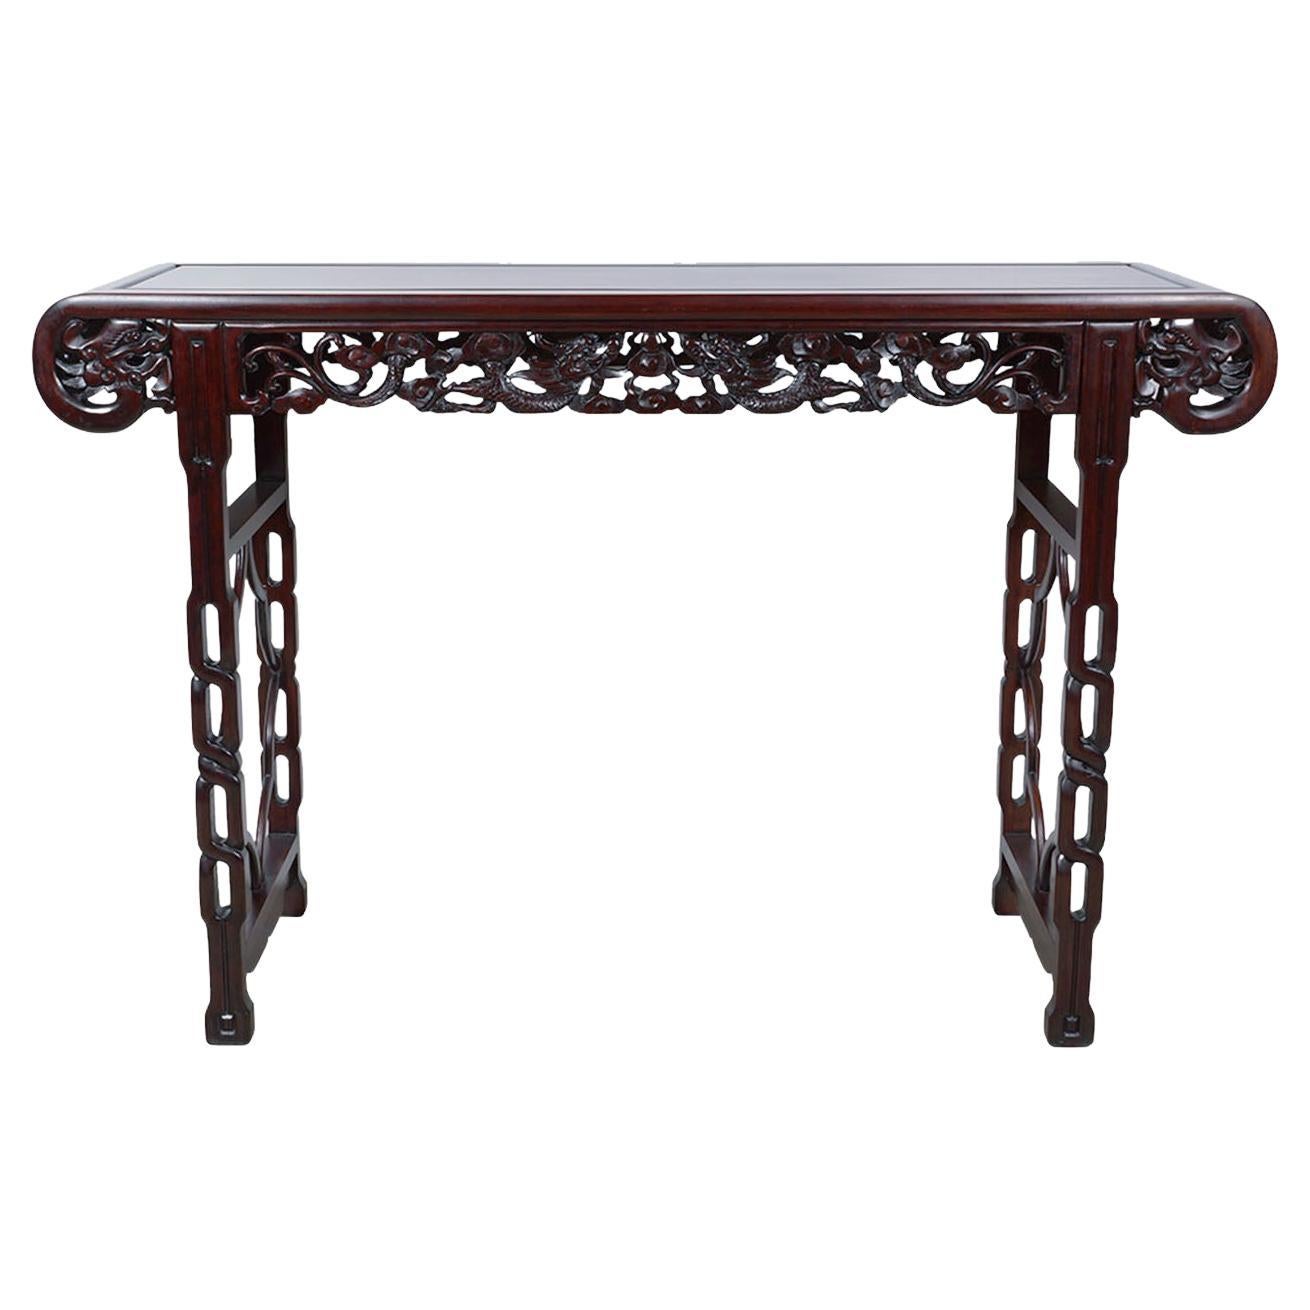 Antique Chinese Carved Rosewood Altar Table, Sofa Table, Entry Console